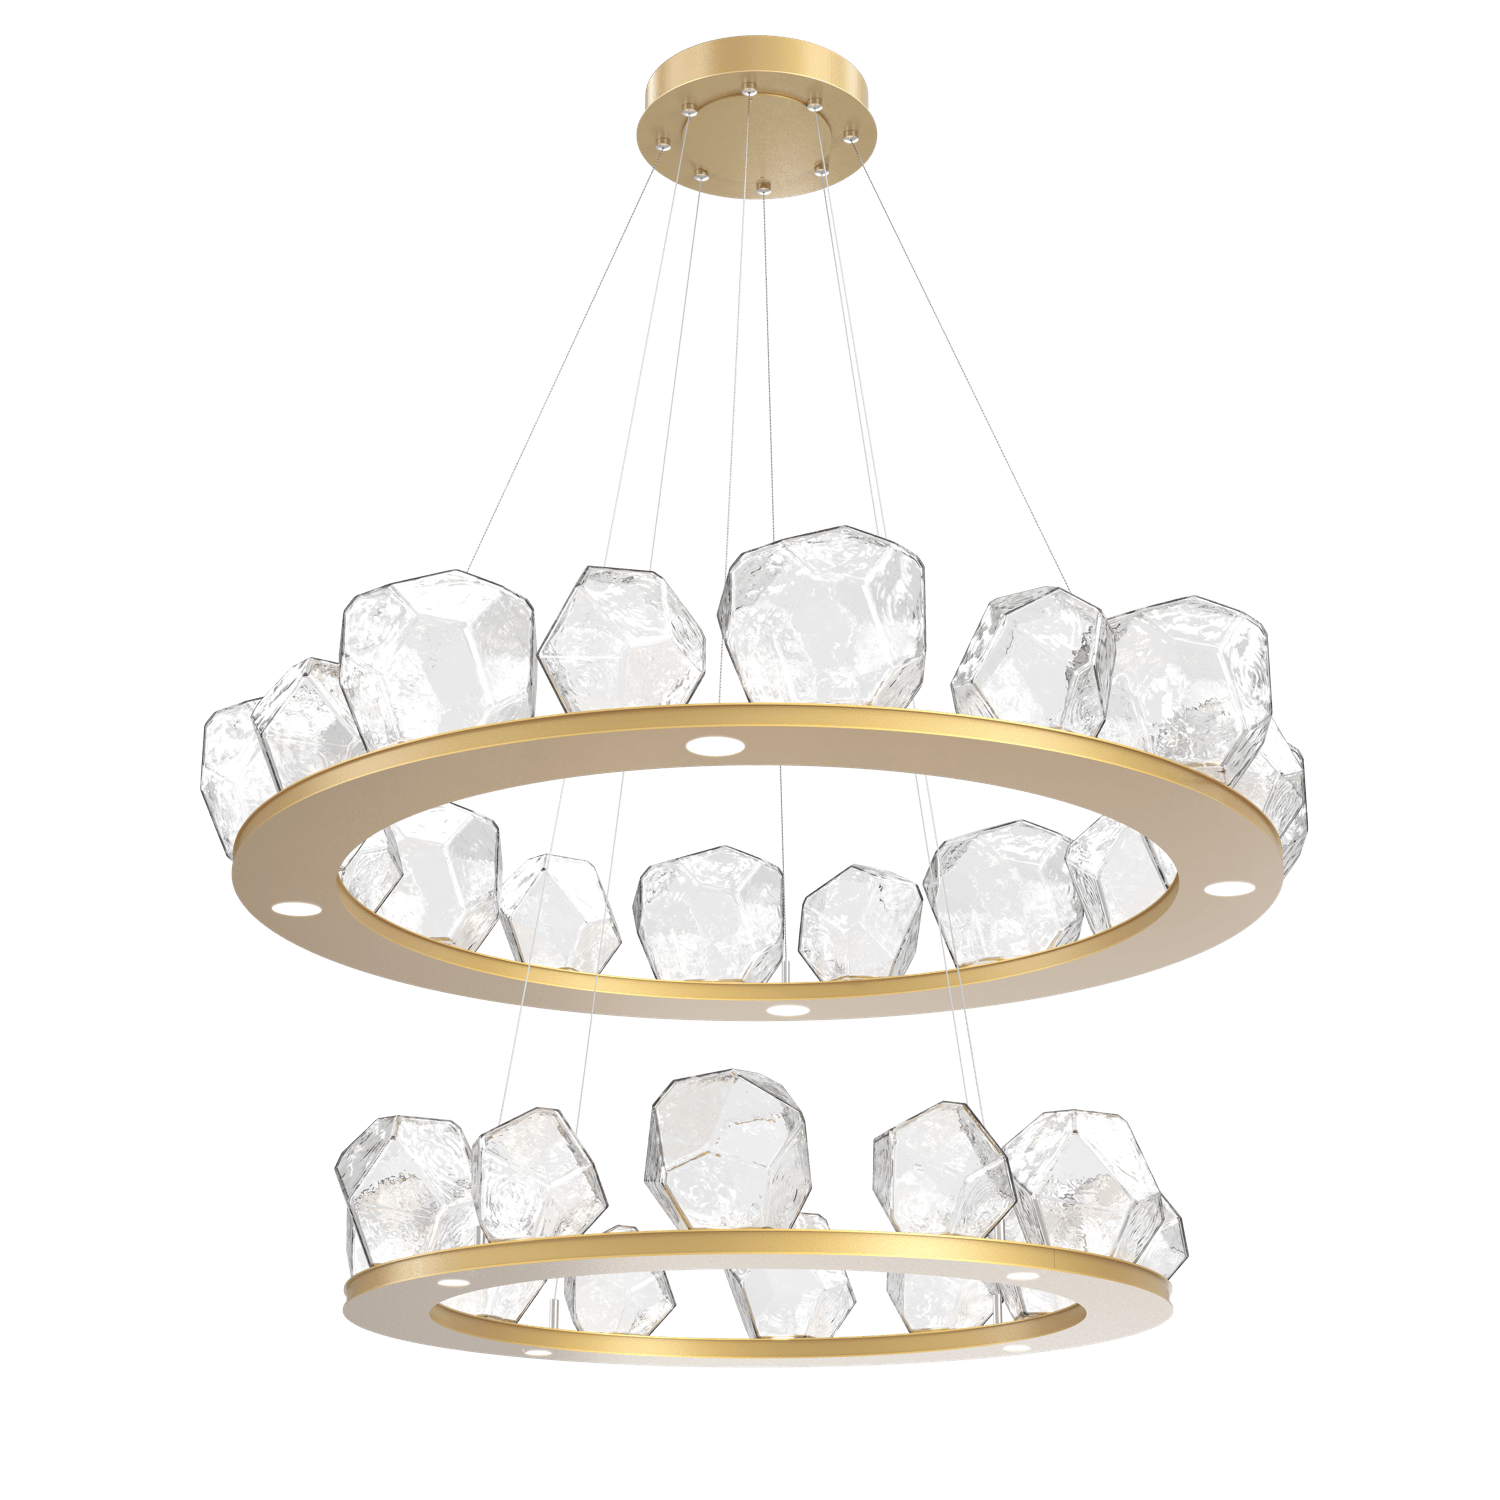 CHB0039-2B-GB-C-Hammerton-Studio-Gem-48-inch-two-tier-ring-chandelier-with-gilded-brass-finish-and-clear-blown-glass-shades-and-LED-lamping